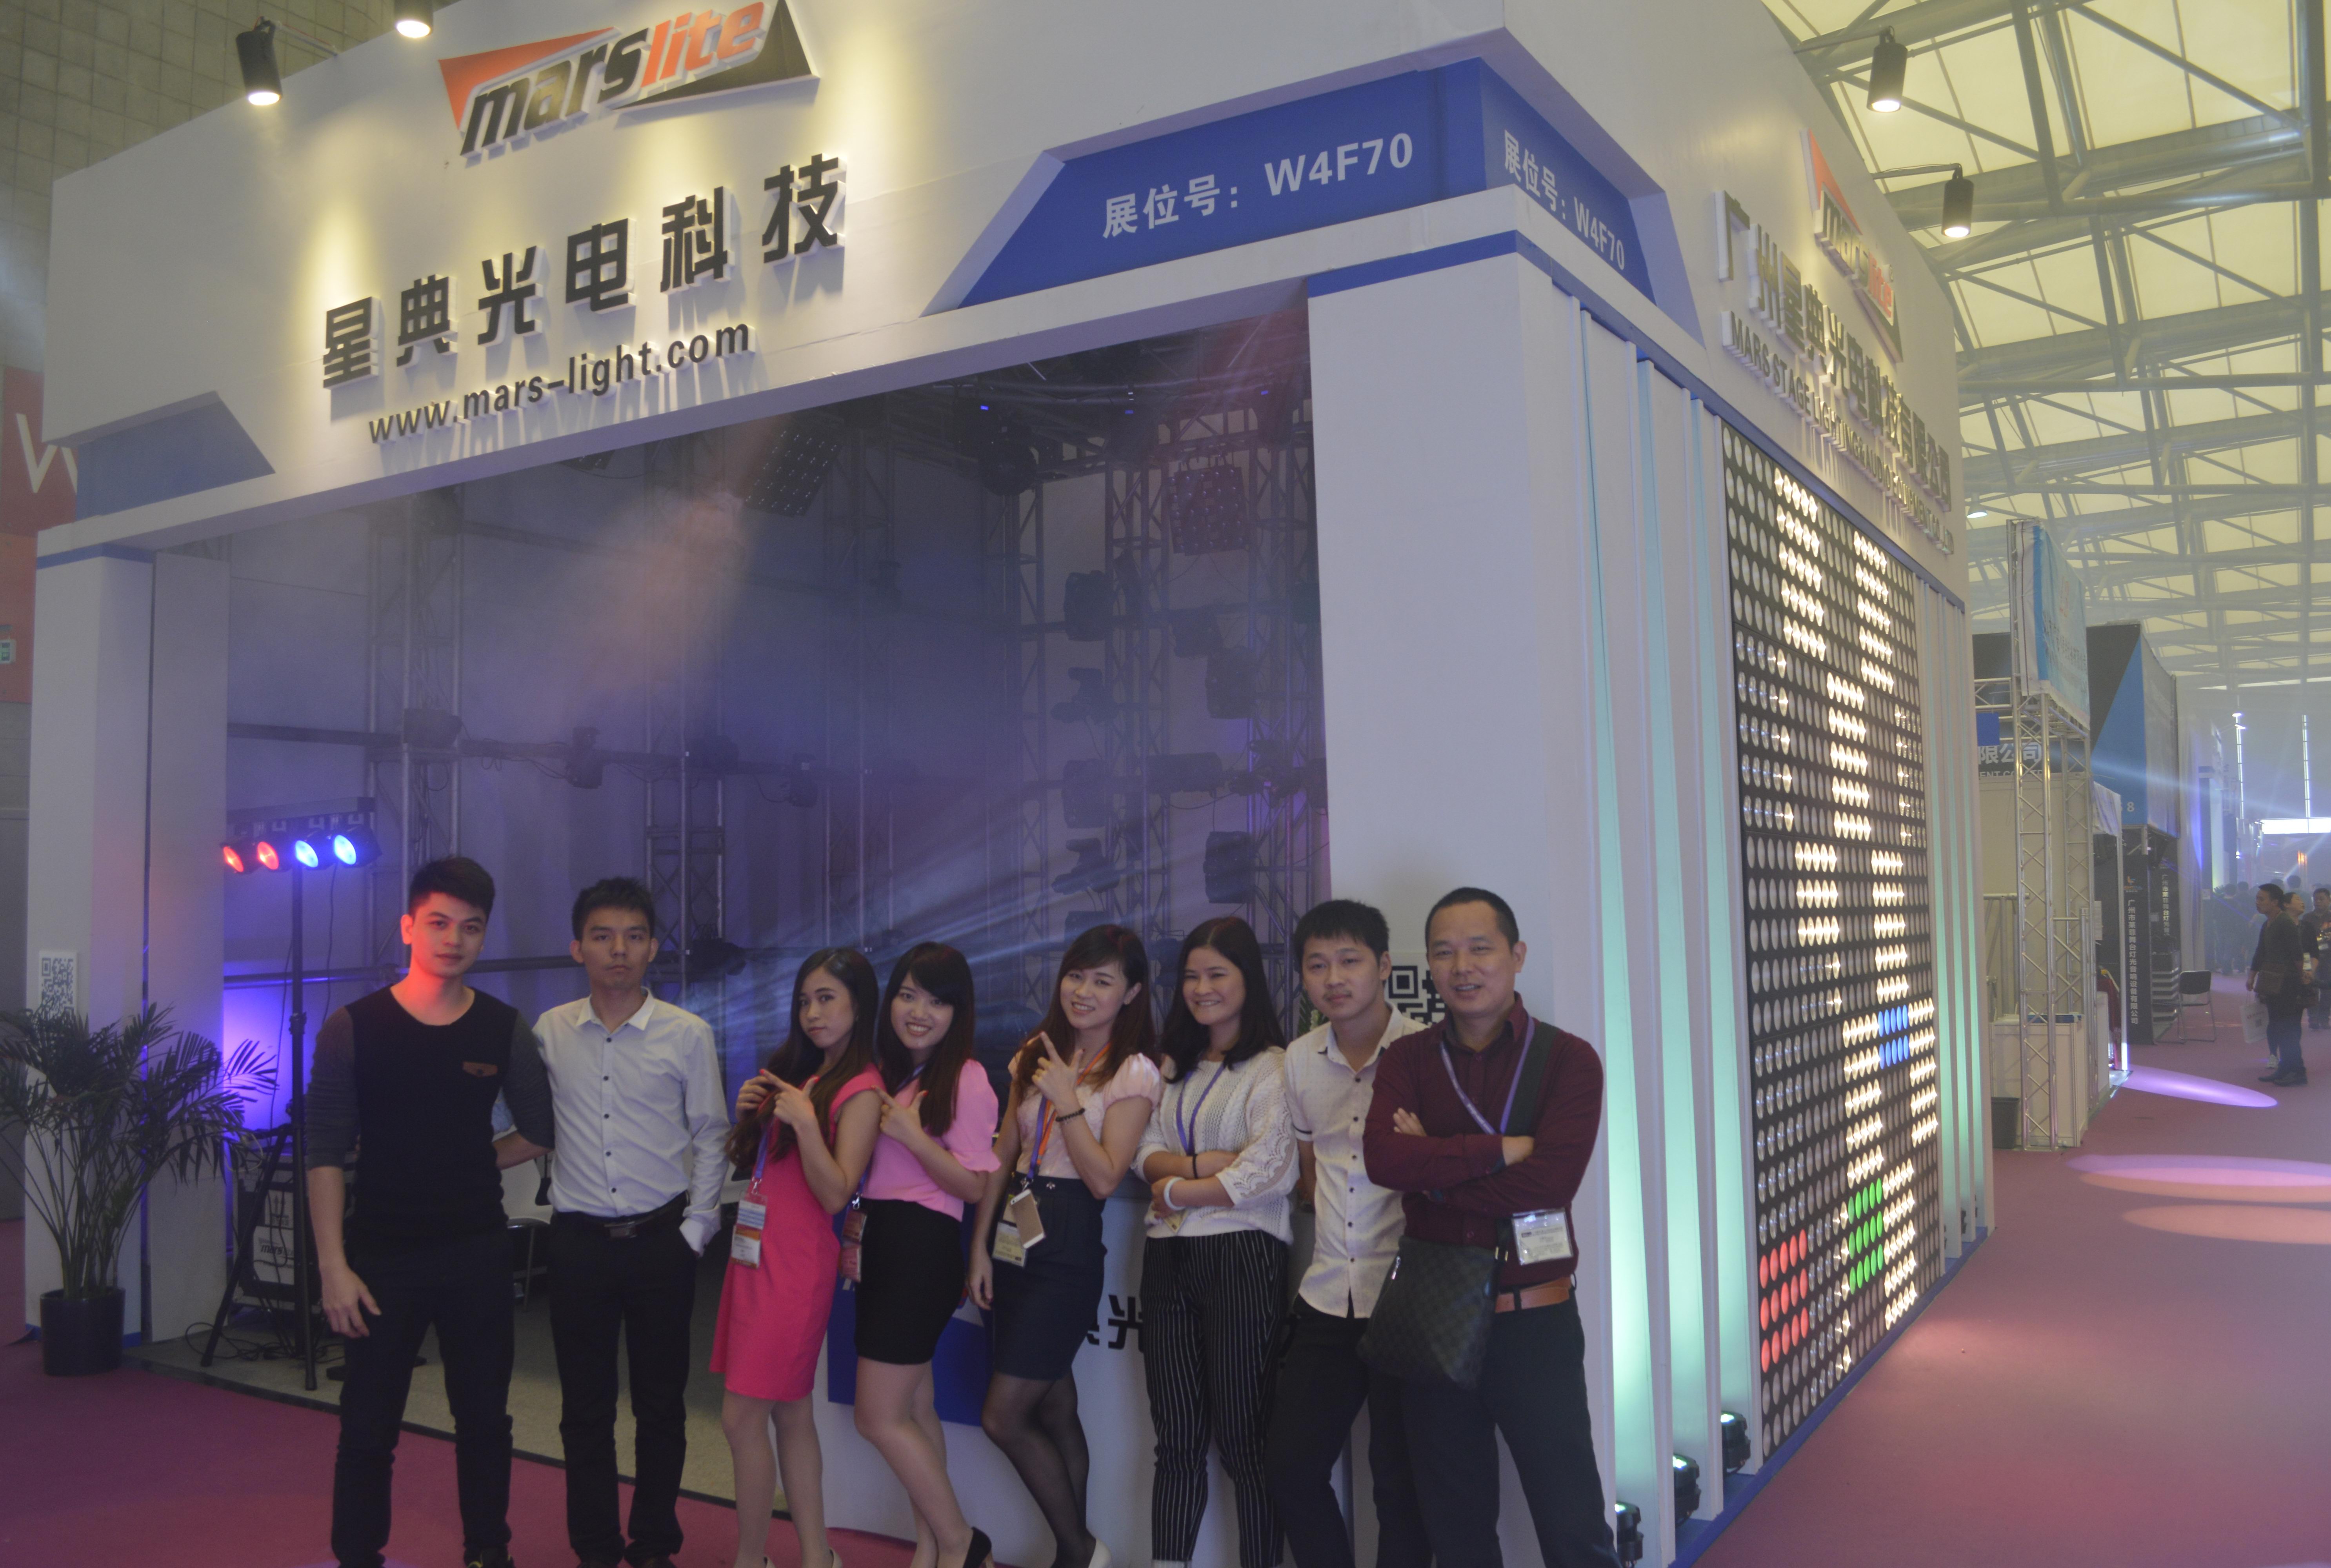 2015 Shanghai Prolight+Sound Show,14-17 Oct, booth number:W4F70